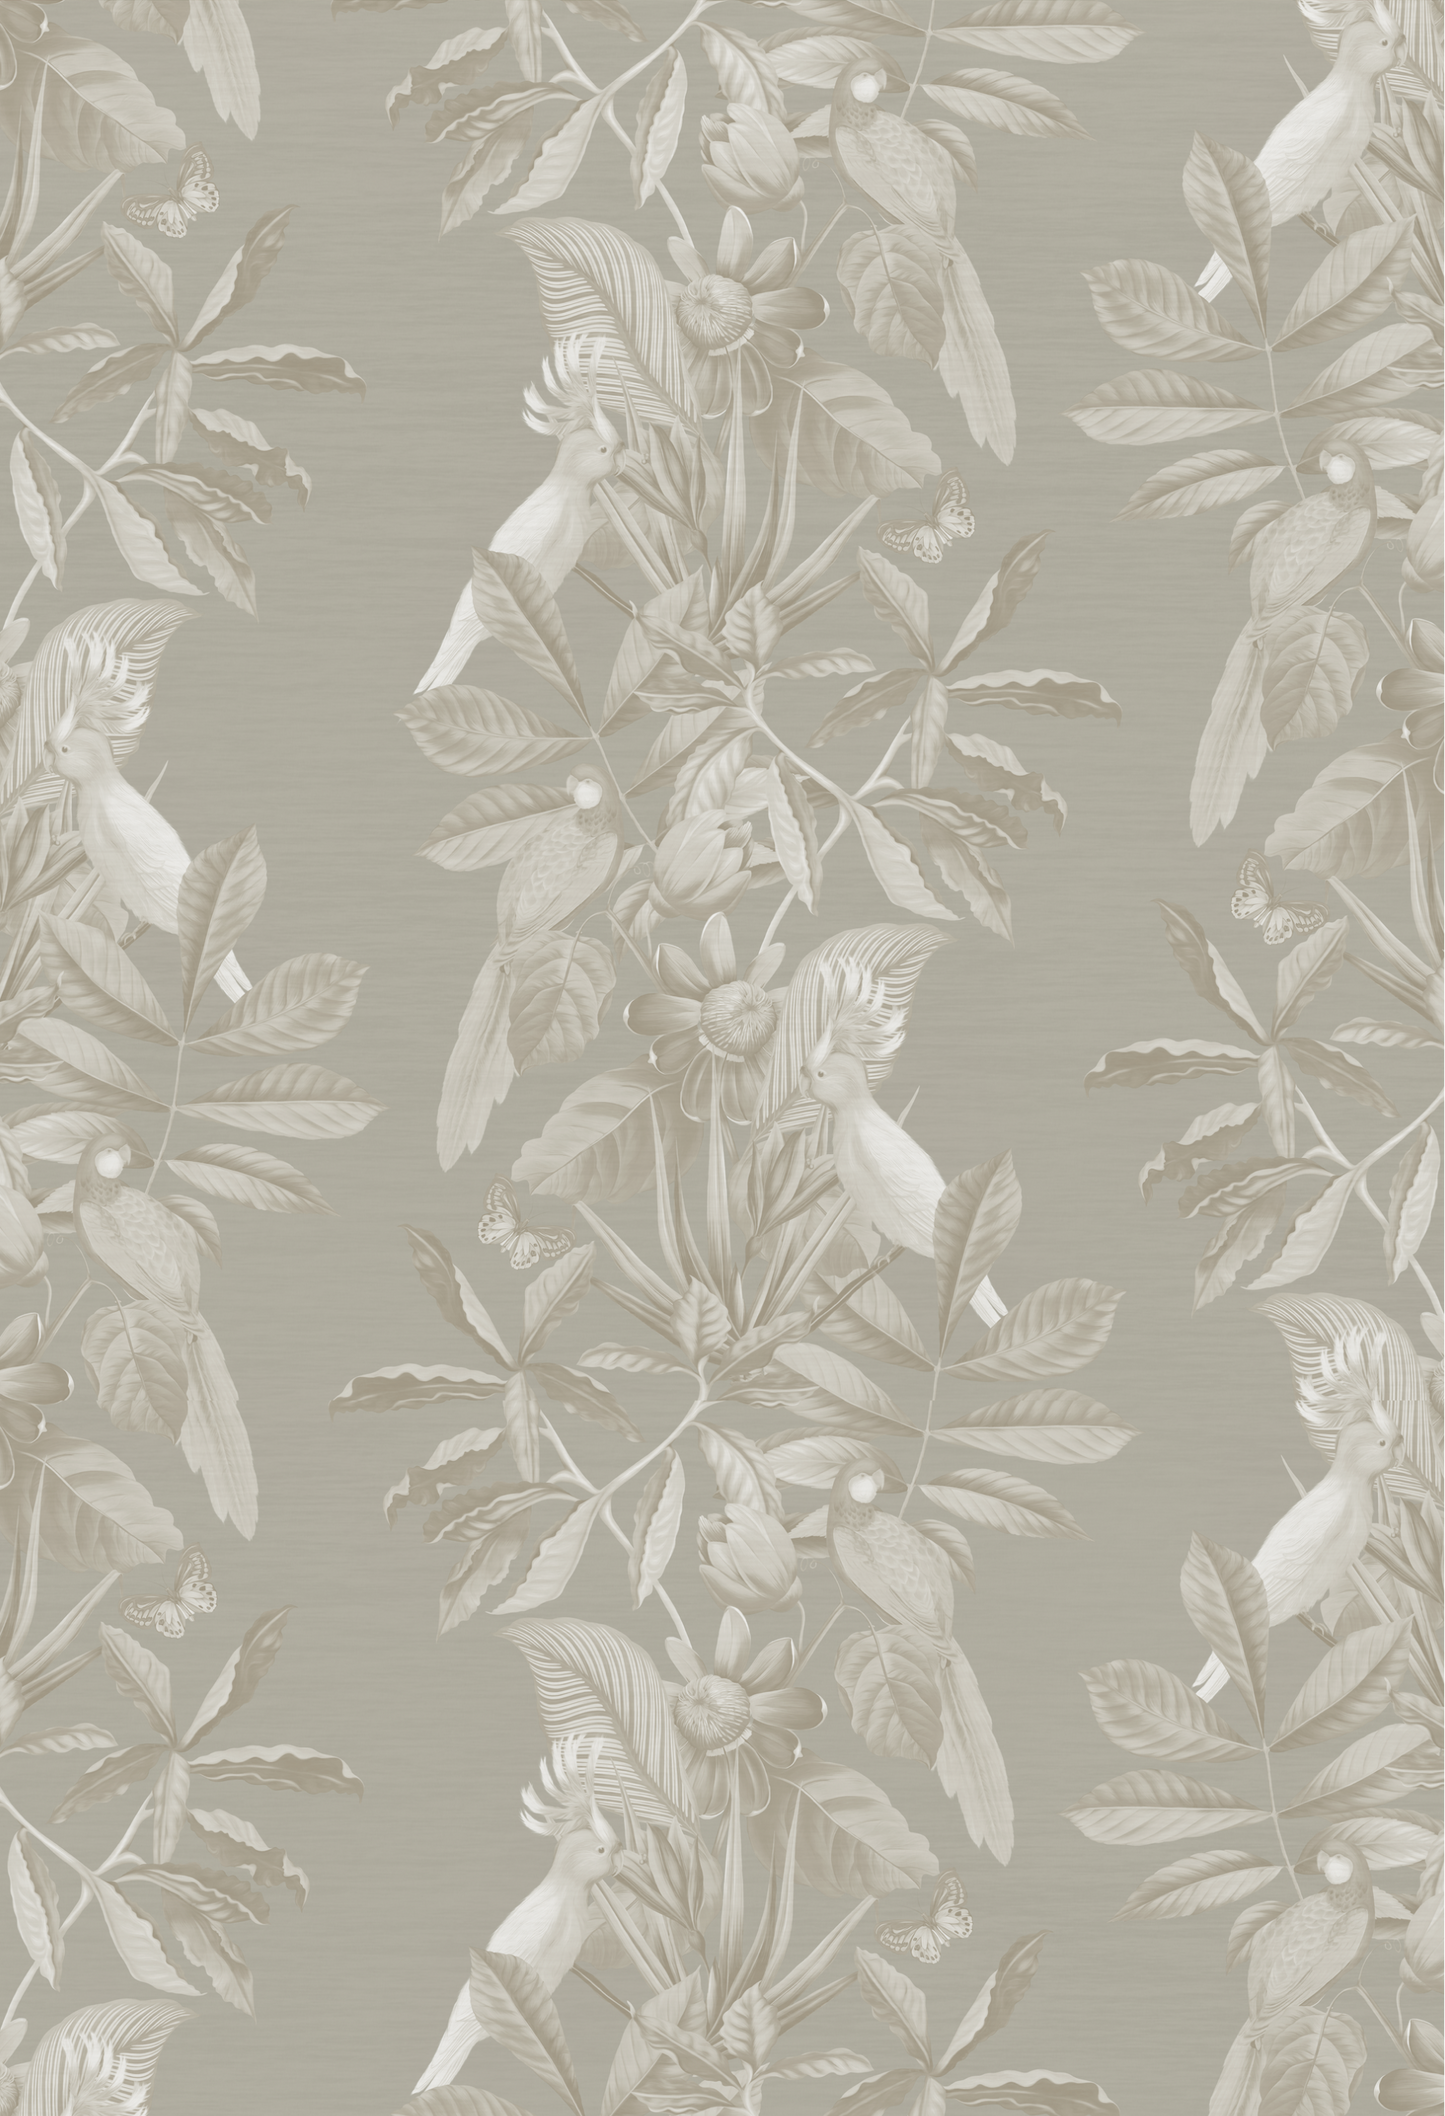 Patterned tropical luxurious wallpaper by Deus ex Gardenia of Passiflora in Ammonite grey  of a tropical scene.